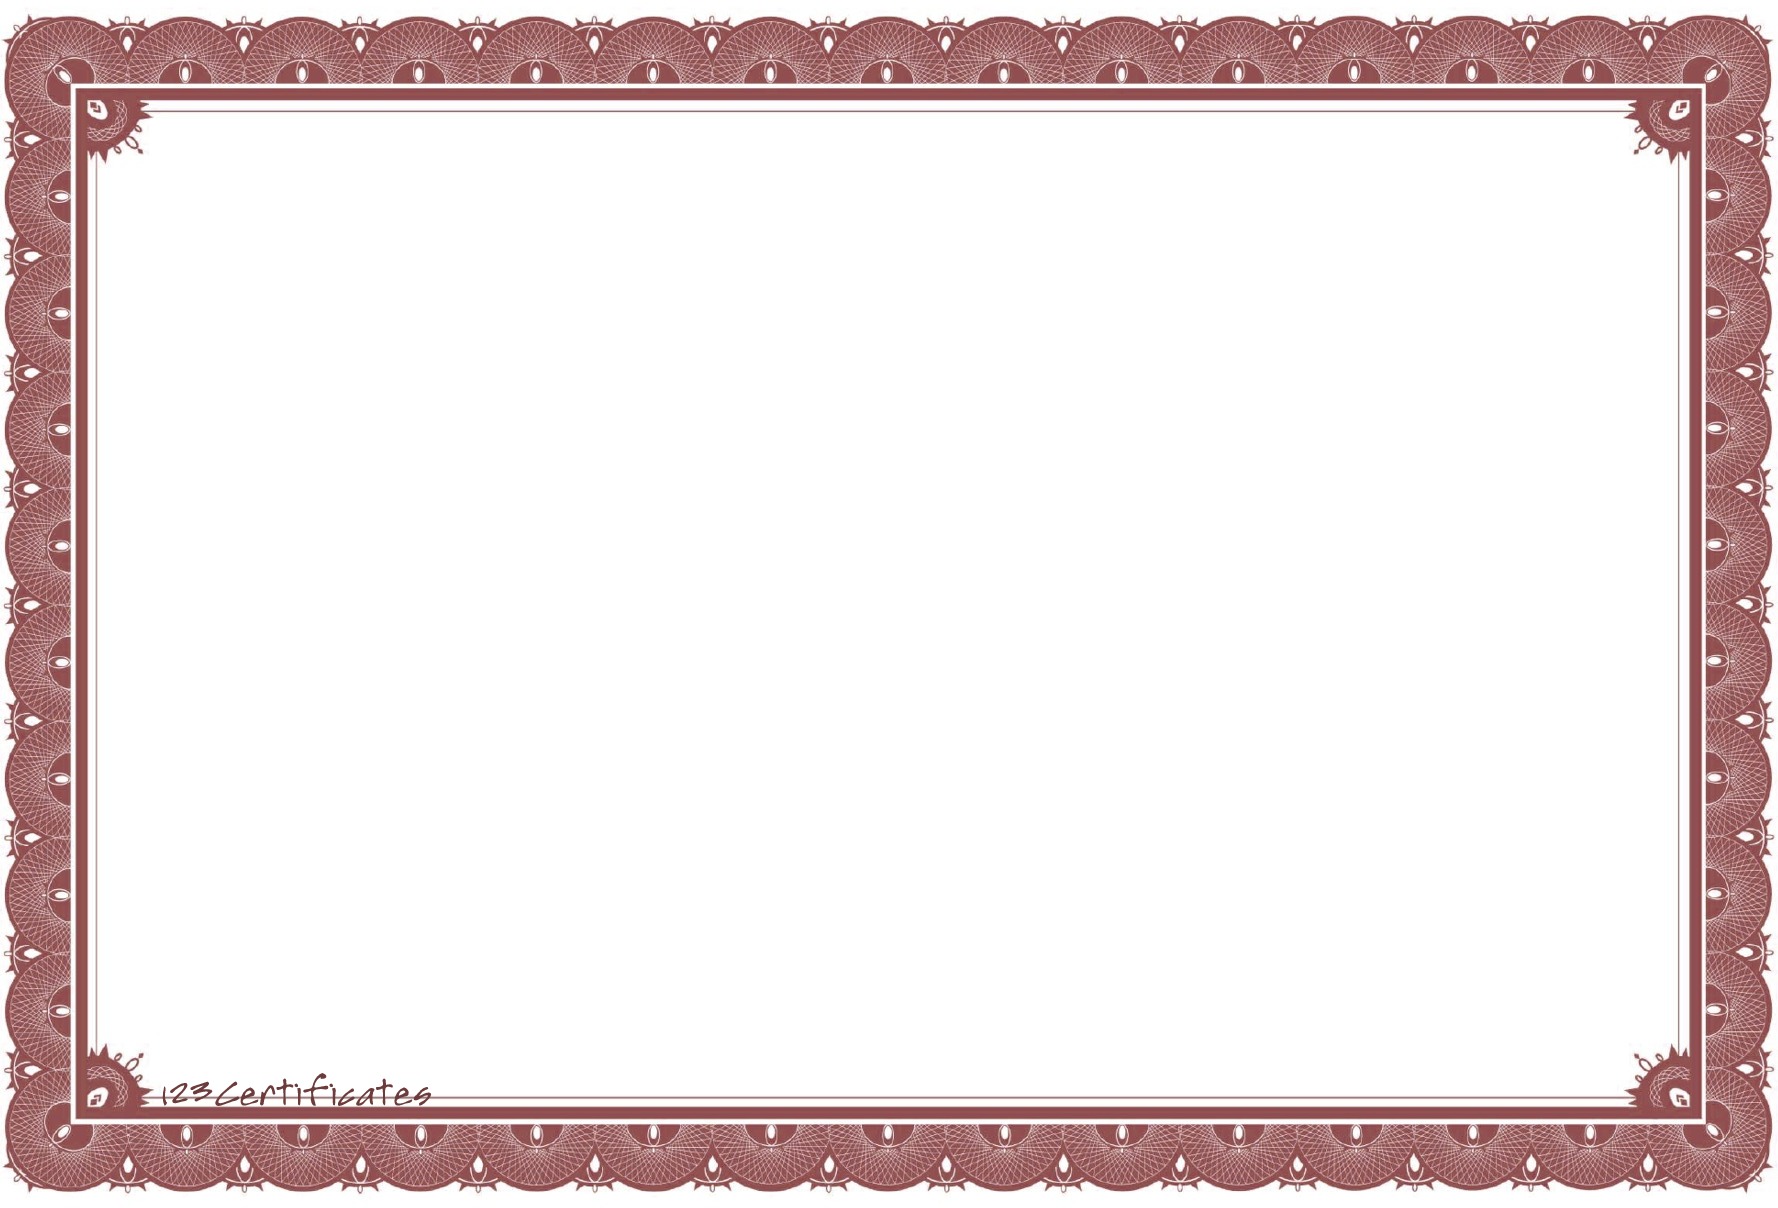 Certificate Template Without Border from clipart-library.com